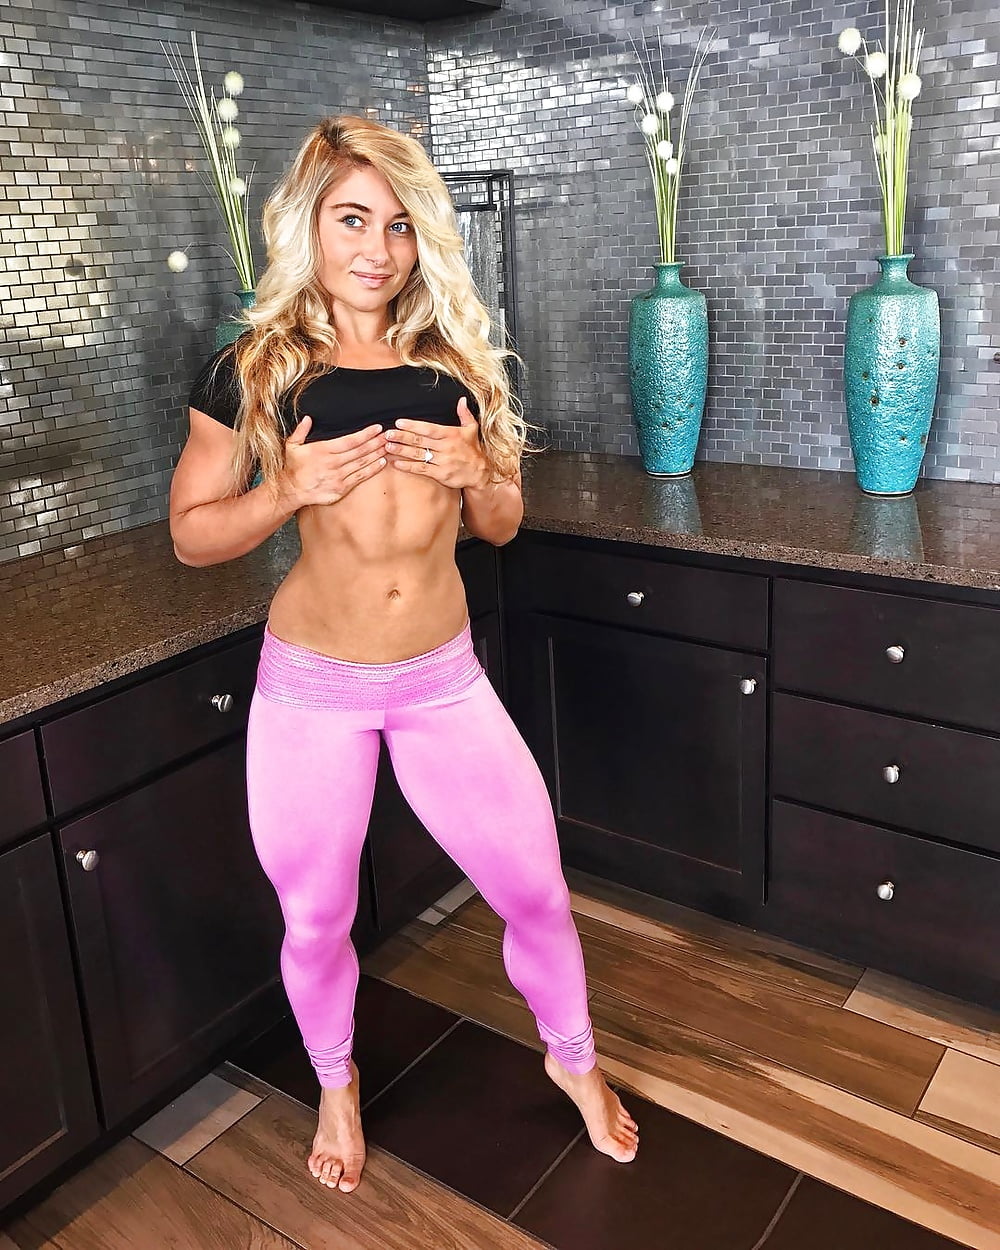 Carriejune bowlby nude